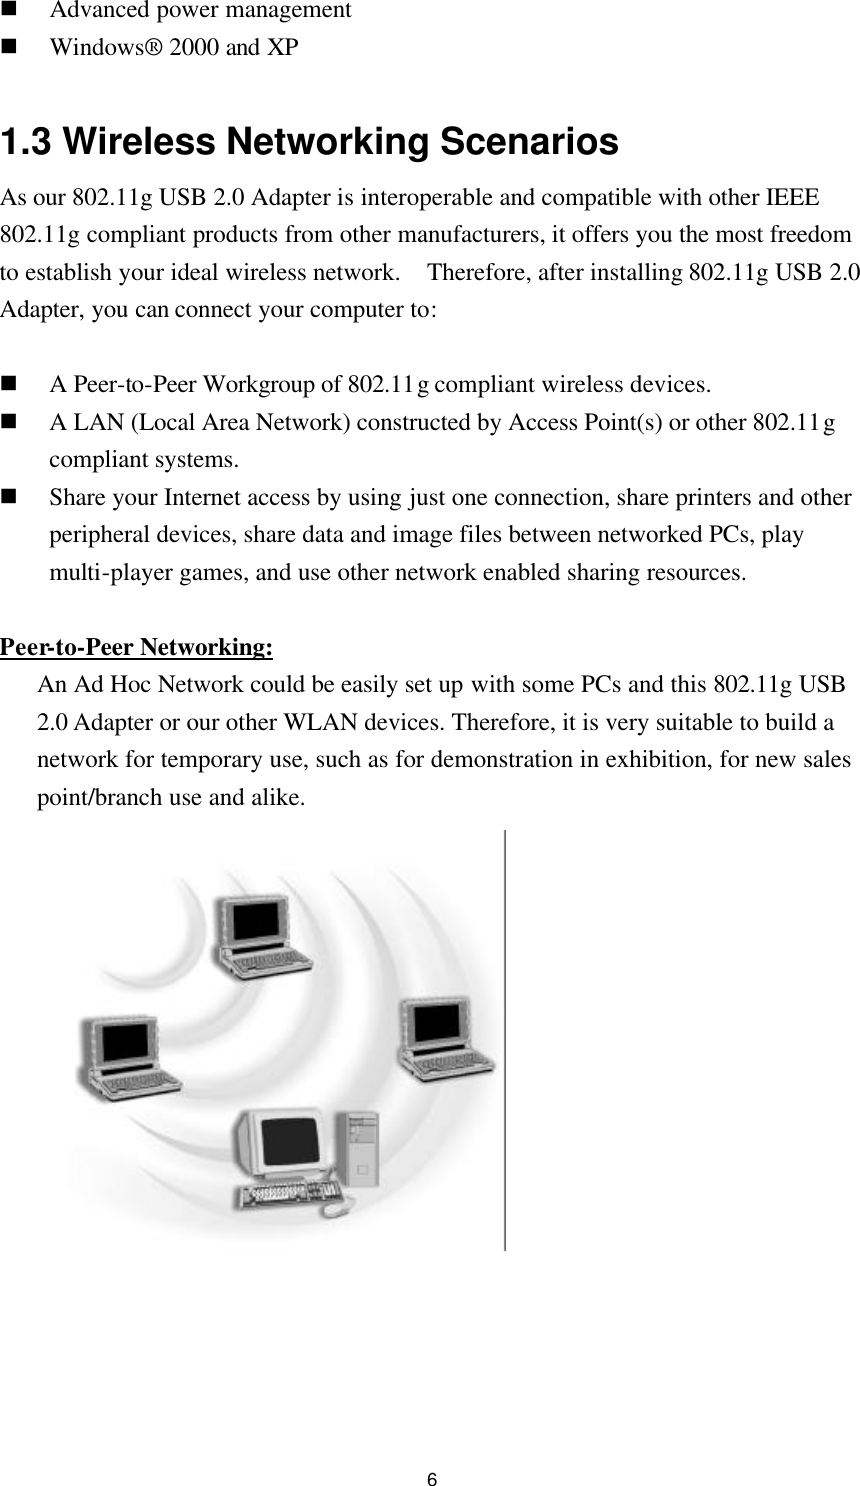  6 n Advanced power management n Windows® 2000 and XP  1.3 Wireless Networking Scenarios As our 802.11g USB 2.0 Adapter is interoperable and compatible with other IEEE 802.11g compliant products from other manufacturers, it offers you the most freedom to establish your ideal wireless network.  Therefore, after installing 802.11g USB 2.0 Adapter, you can connect your computer to:  n A Peer-to-Peer Workgroup of 802.11g compliant wireless devices. n A LAN (Local Area Network) constructed by Access Point(s) or other 802.11g compliant systems. n Share your Internet access by using just one connection, share printers and other peripheral devices, share data and image files between networked PCs, play multi-player games, and use other network enabled sharing resources.  Peer-to-Peer Networking: An Ad Hoc Network could be easily set up with some PCs and this 802.11g USB 2.0 Adapter or our other WLAN devices. Therefore, it is very suitable to build a network for temporary use, such as for demonstration in exhibition, for new sales point/branch use and alike.     